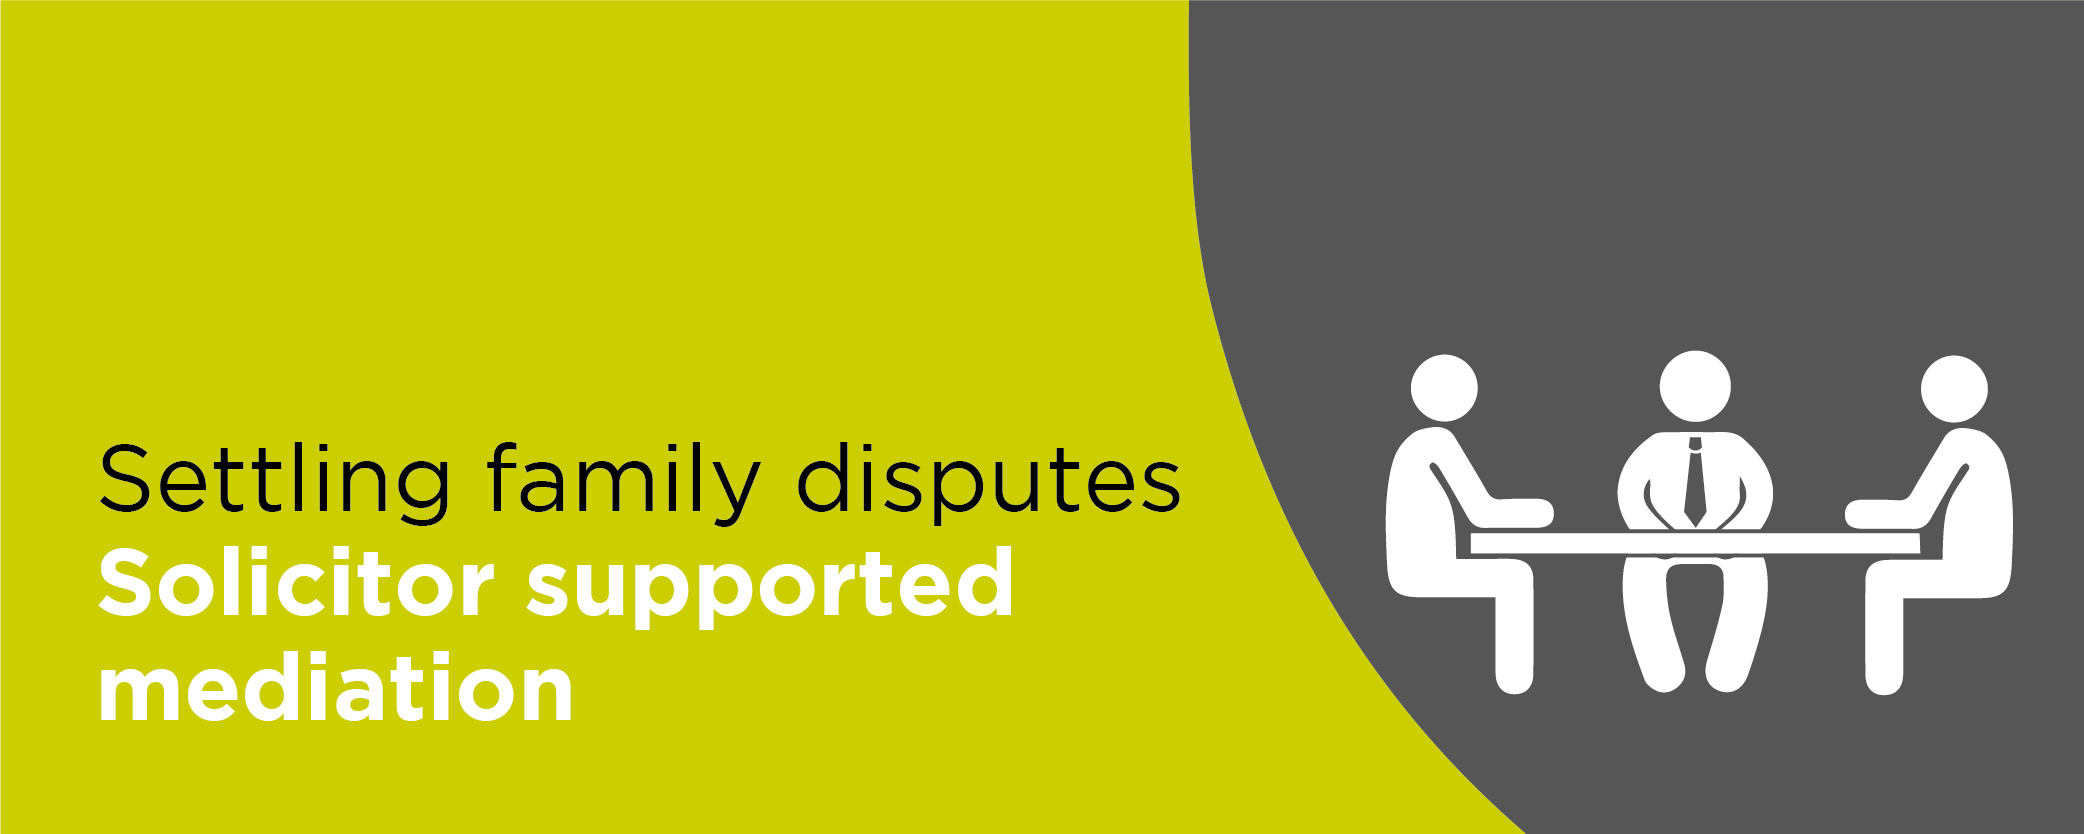 Settling Family Disputes: Solicitor supported mediation